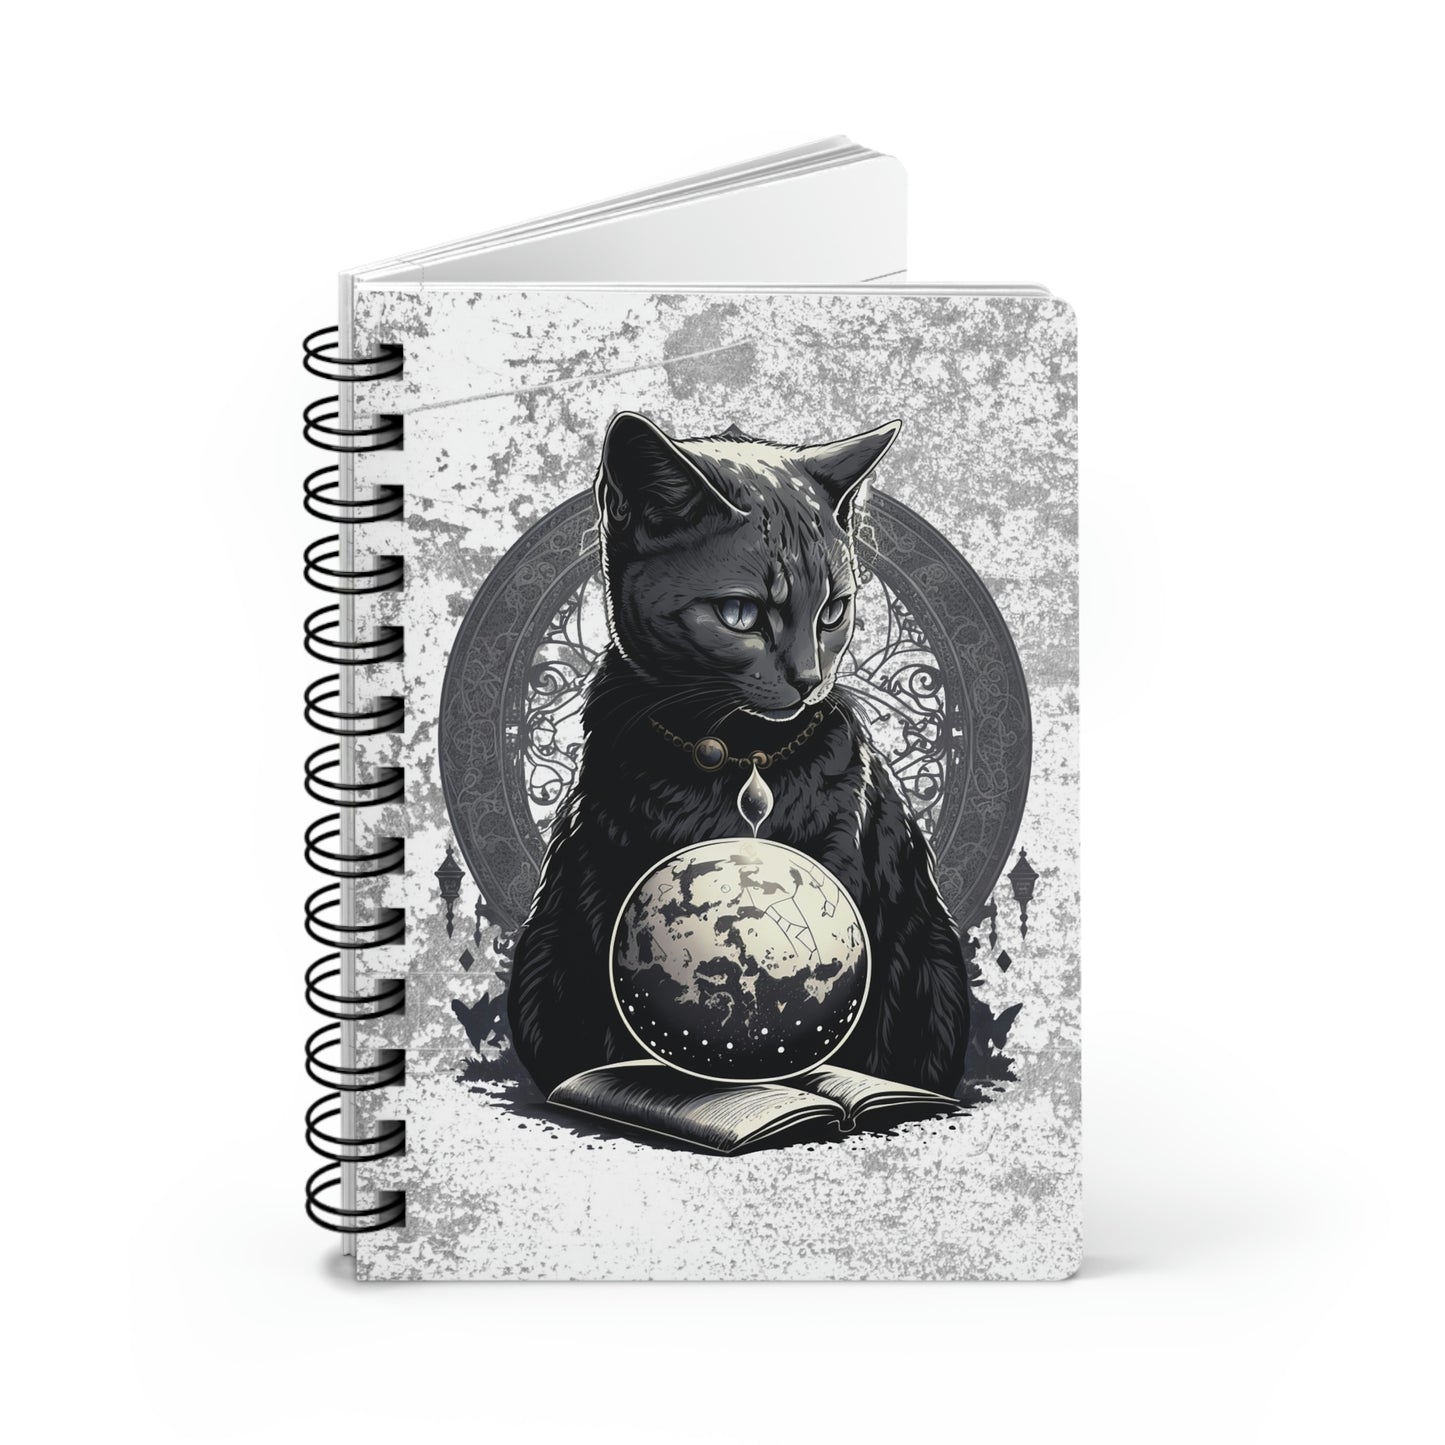 Cosmic Cat Spiral Bound Journal, cat magician notebook, magical journal, witchy gothic cat journal, whimsical celestial fantasy notebook